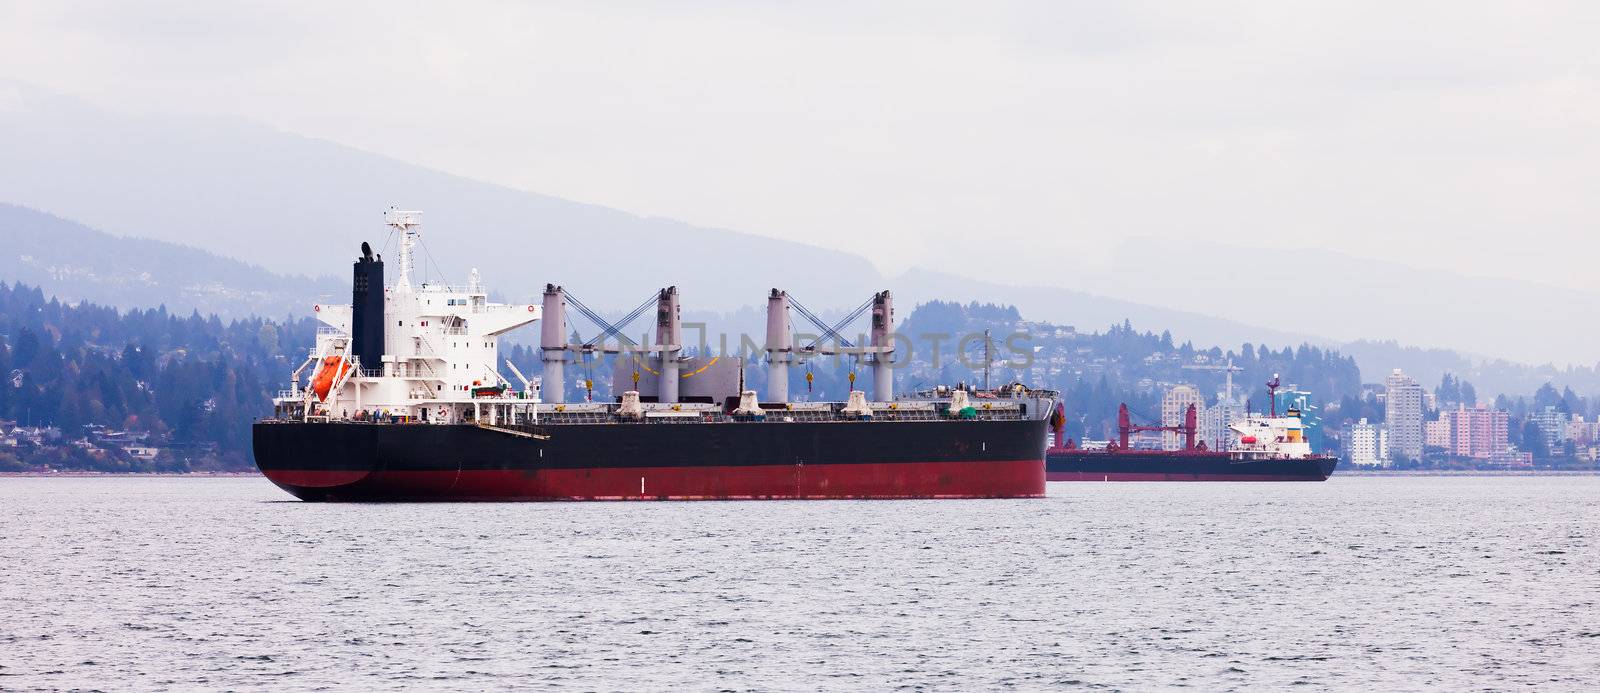 Busy coastal shipping lane off North Vancouver by PiLens